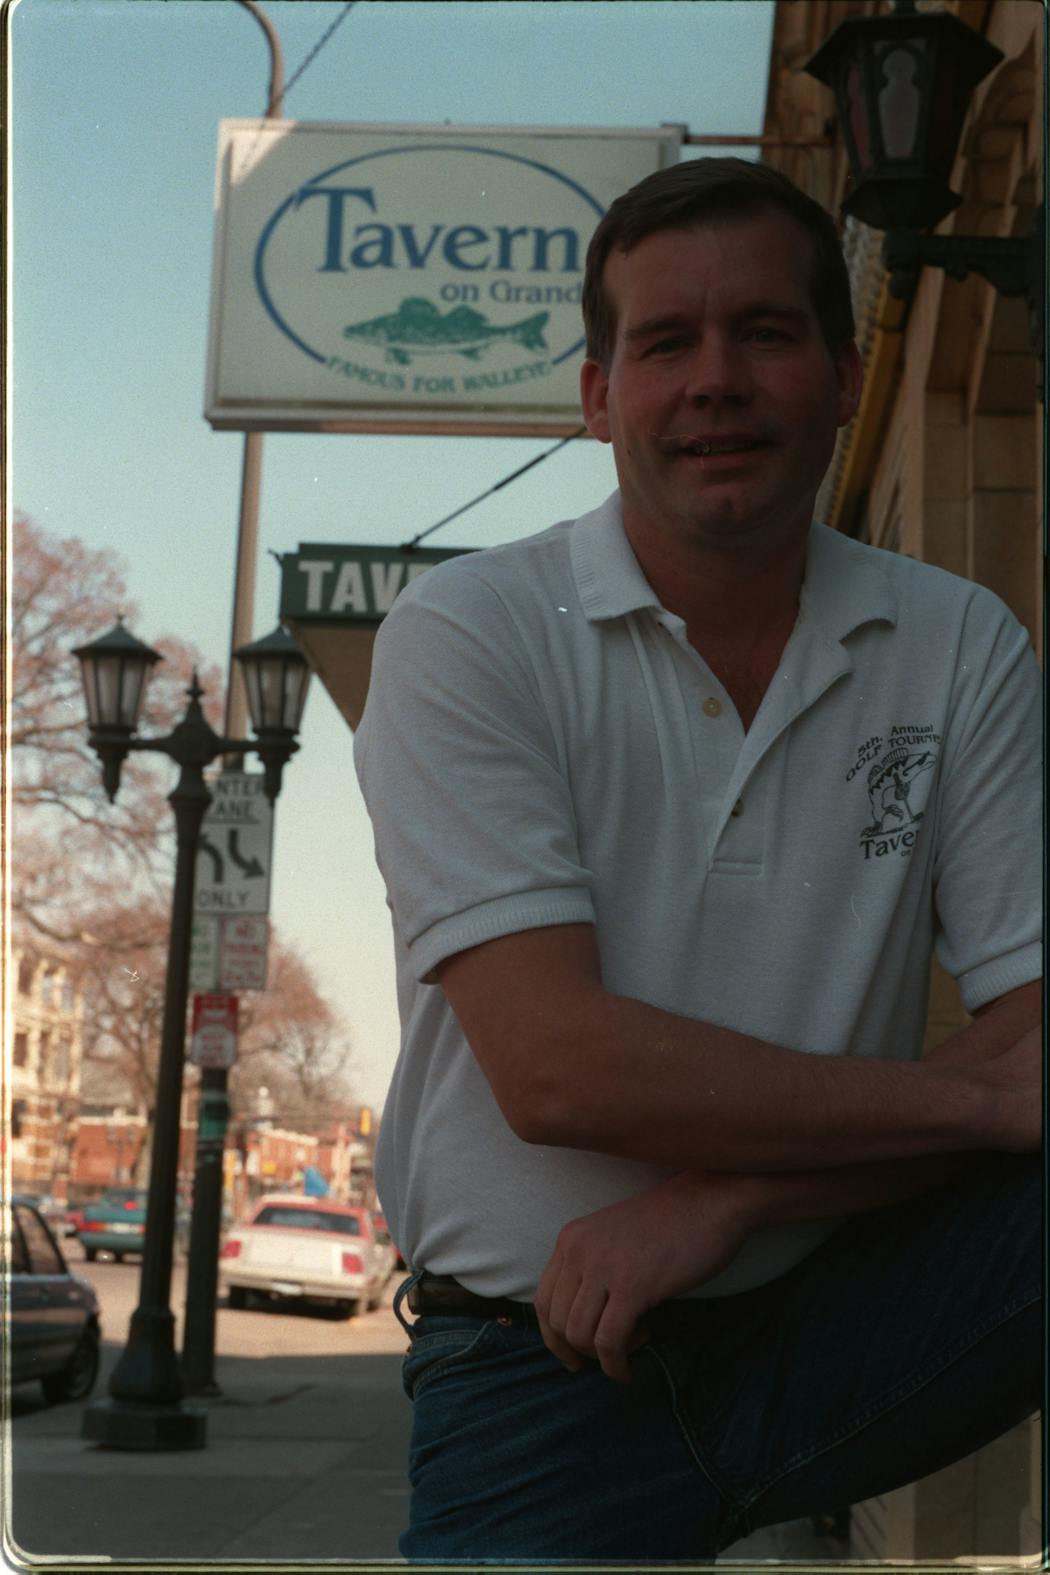 David Wildmo stood in front of Tavern on Grand in St. Paul in 1995.